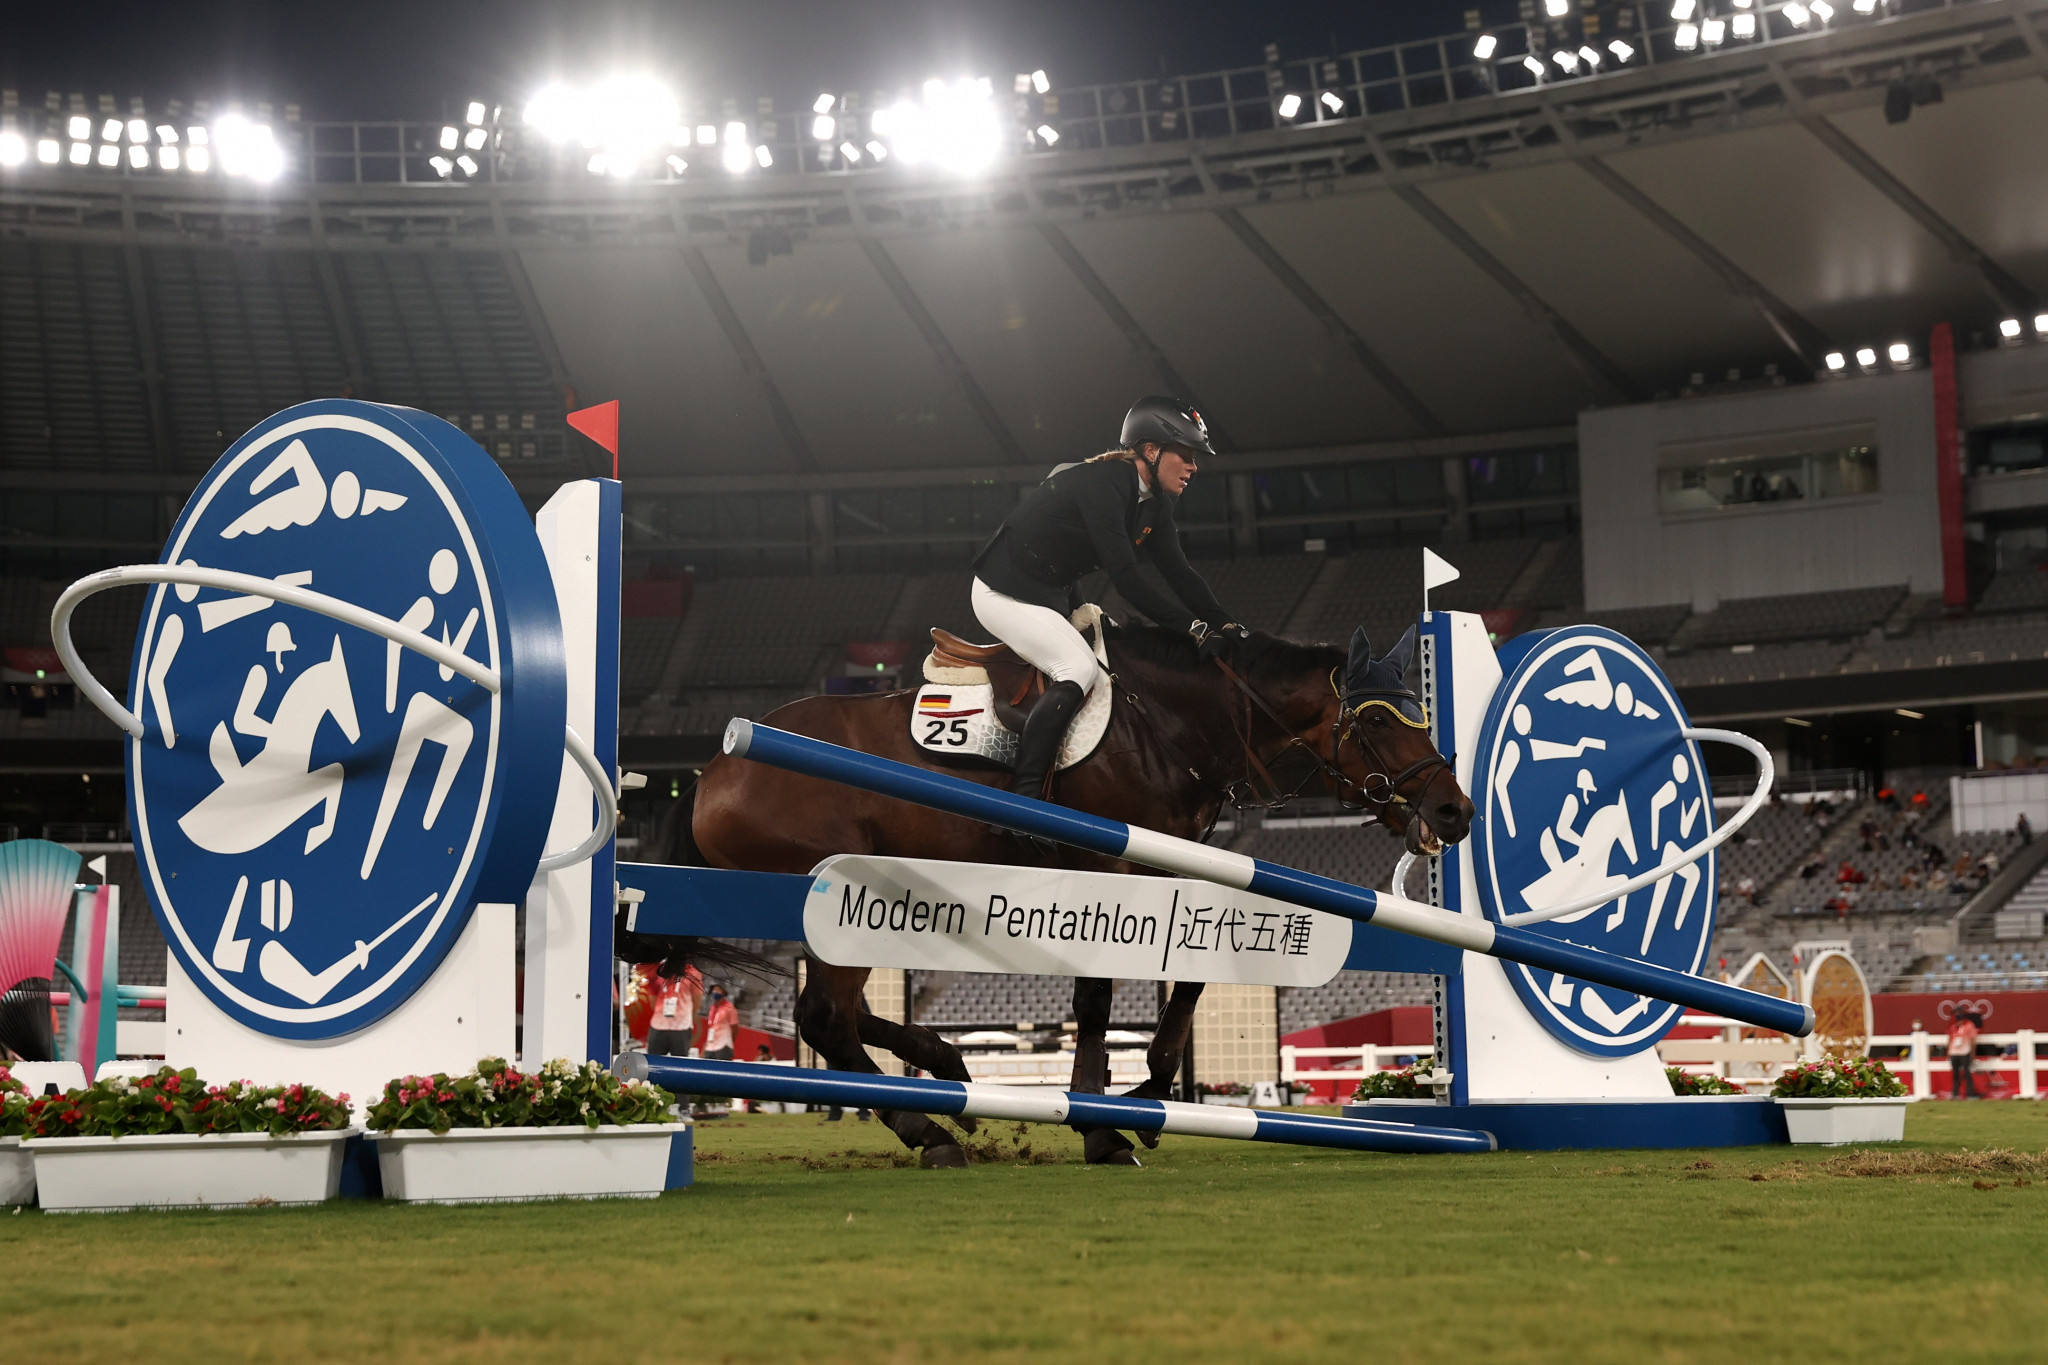 Riding is being dropped as one of modern pentathlon's five disciplines after a sorry showing at Tokyo 2020 ©Getty Images